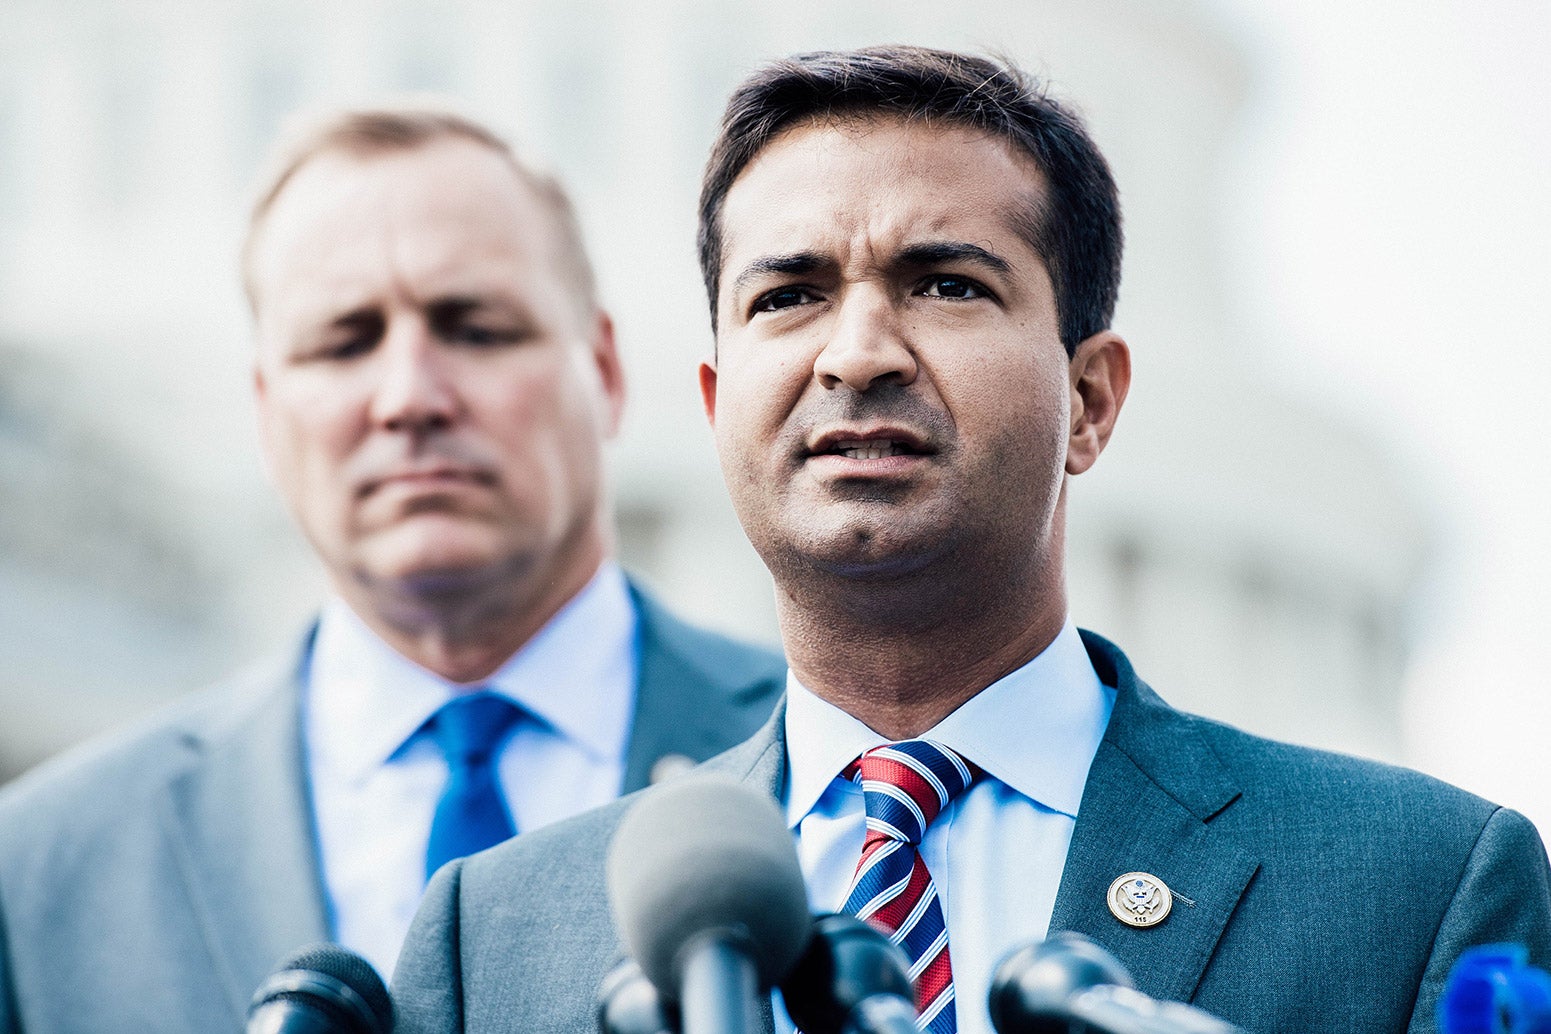 Florida Rep. Carlos Curbelo holds a news conference on immigration reform at the Capitol on Wednesday.